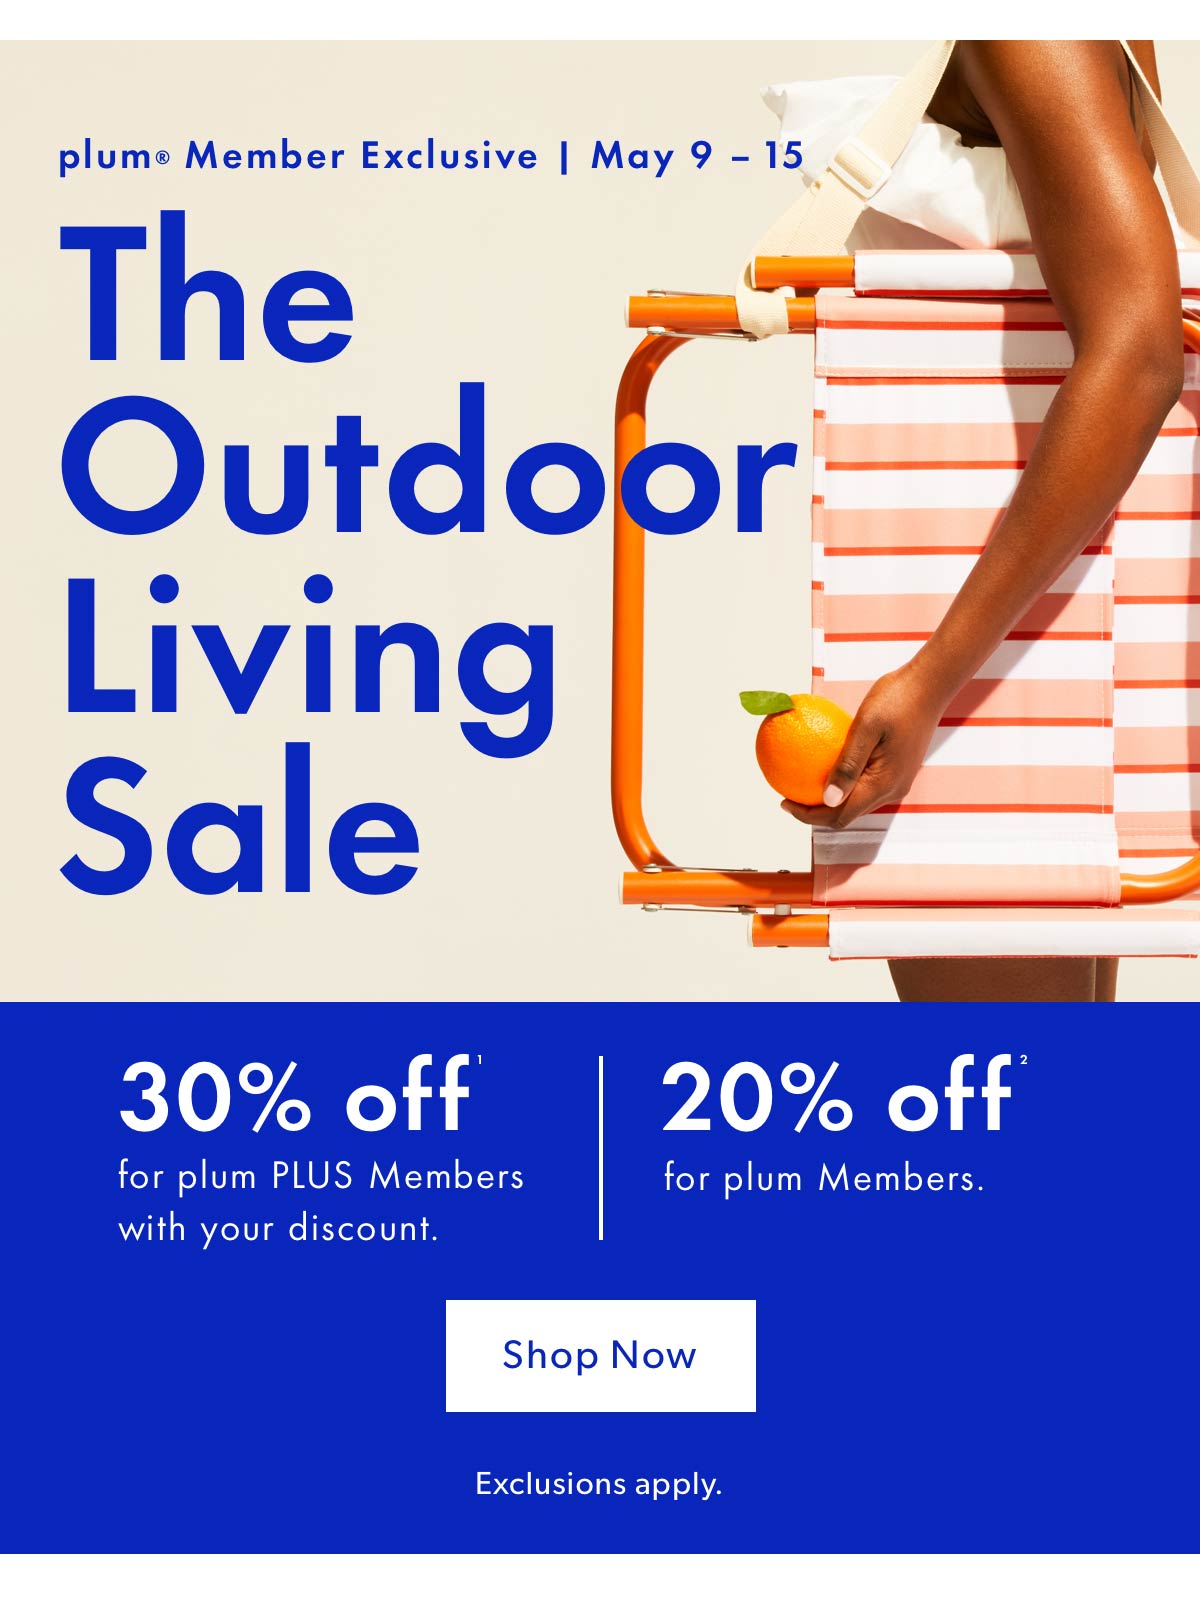 The Outdoor Living Sale